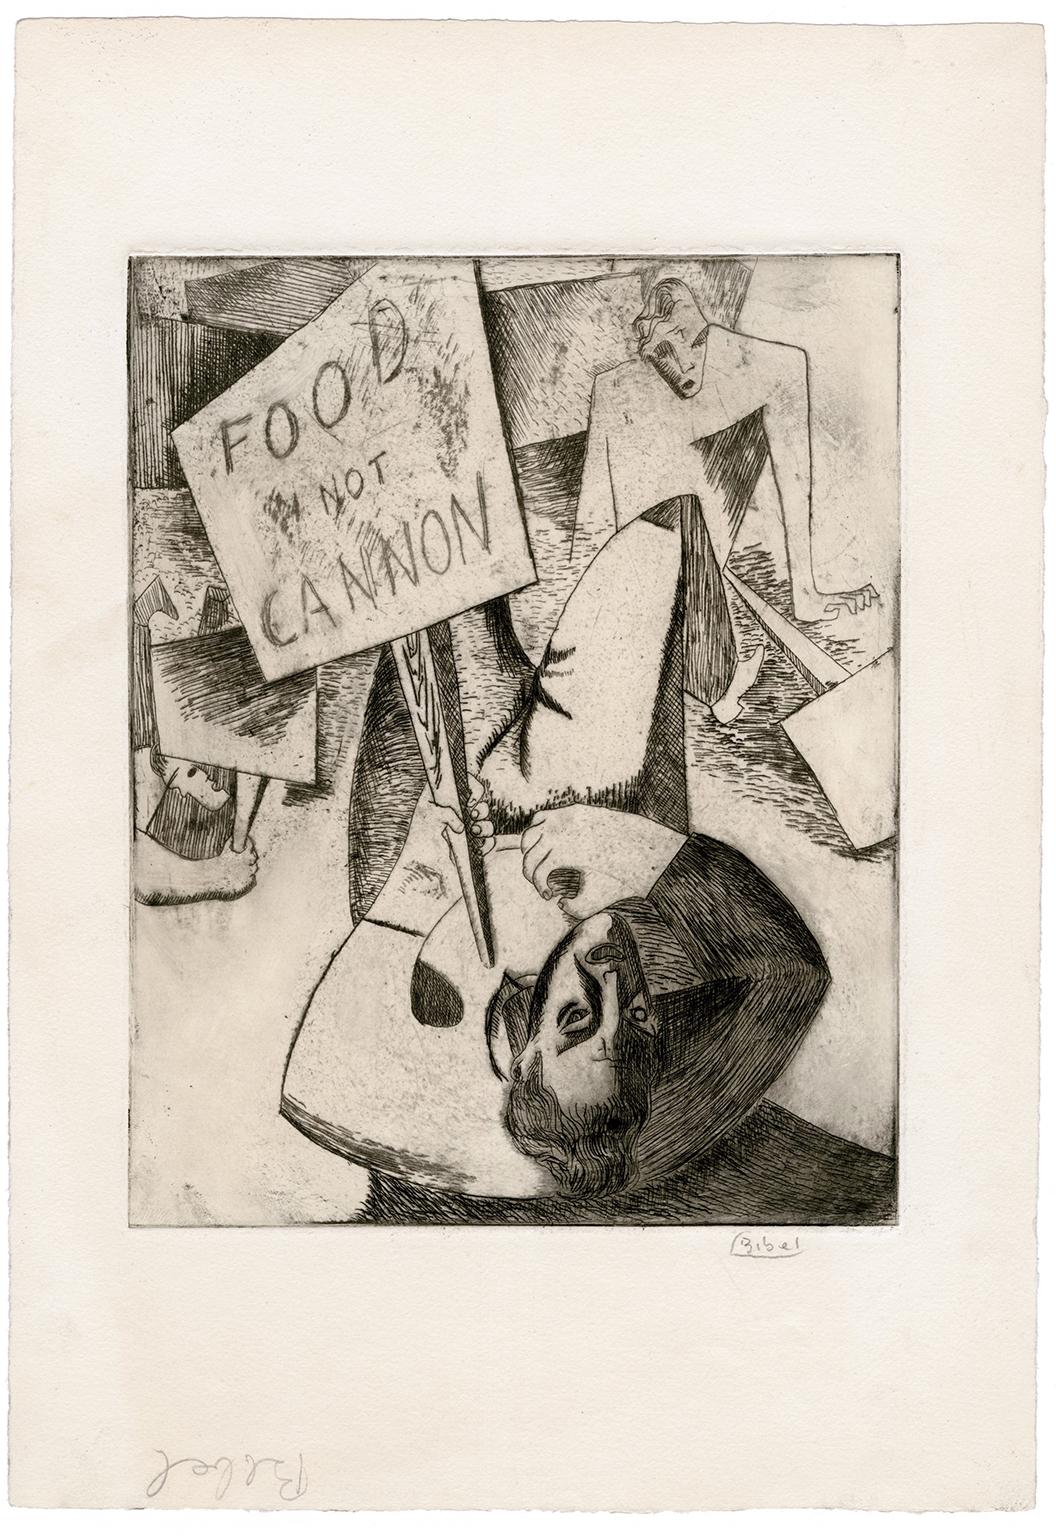 'Food Not Cannon' — rare WPA modernist work of  Social Conscience - Print by Leon Bibel